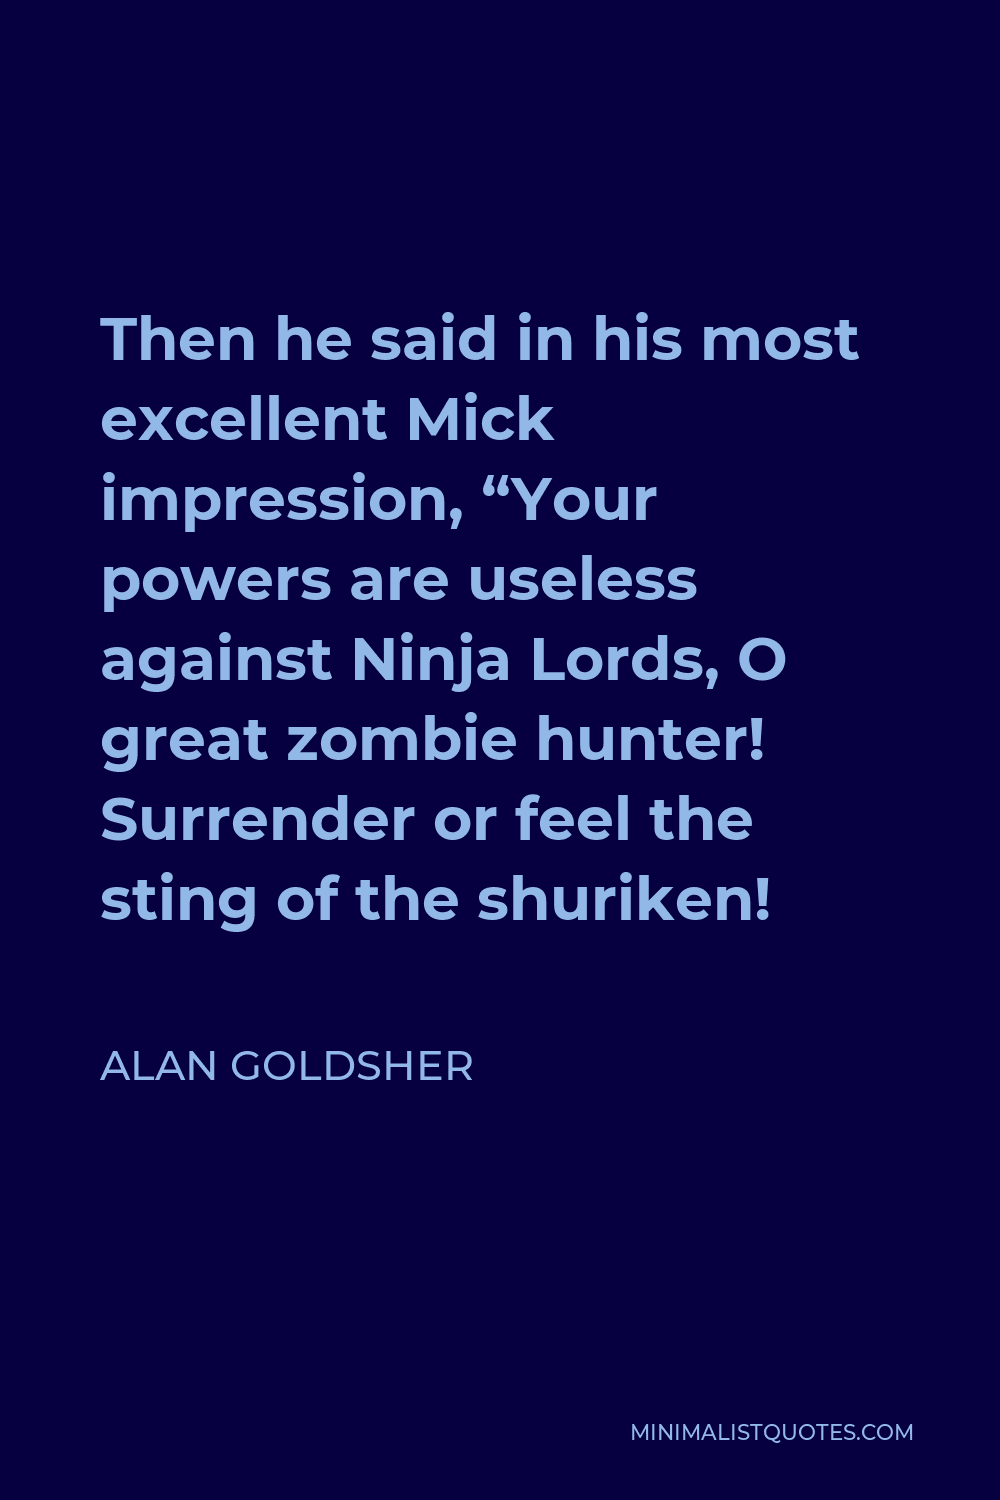 Alan Goldsher Quote - Then he said in his most excellent Mick impression, “Your powers are useless against Ninja Lords, O great zombie hunter! Surrender or feel the sting of the shuriken!